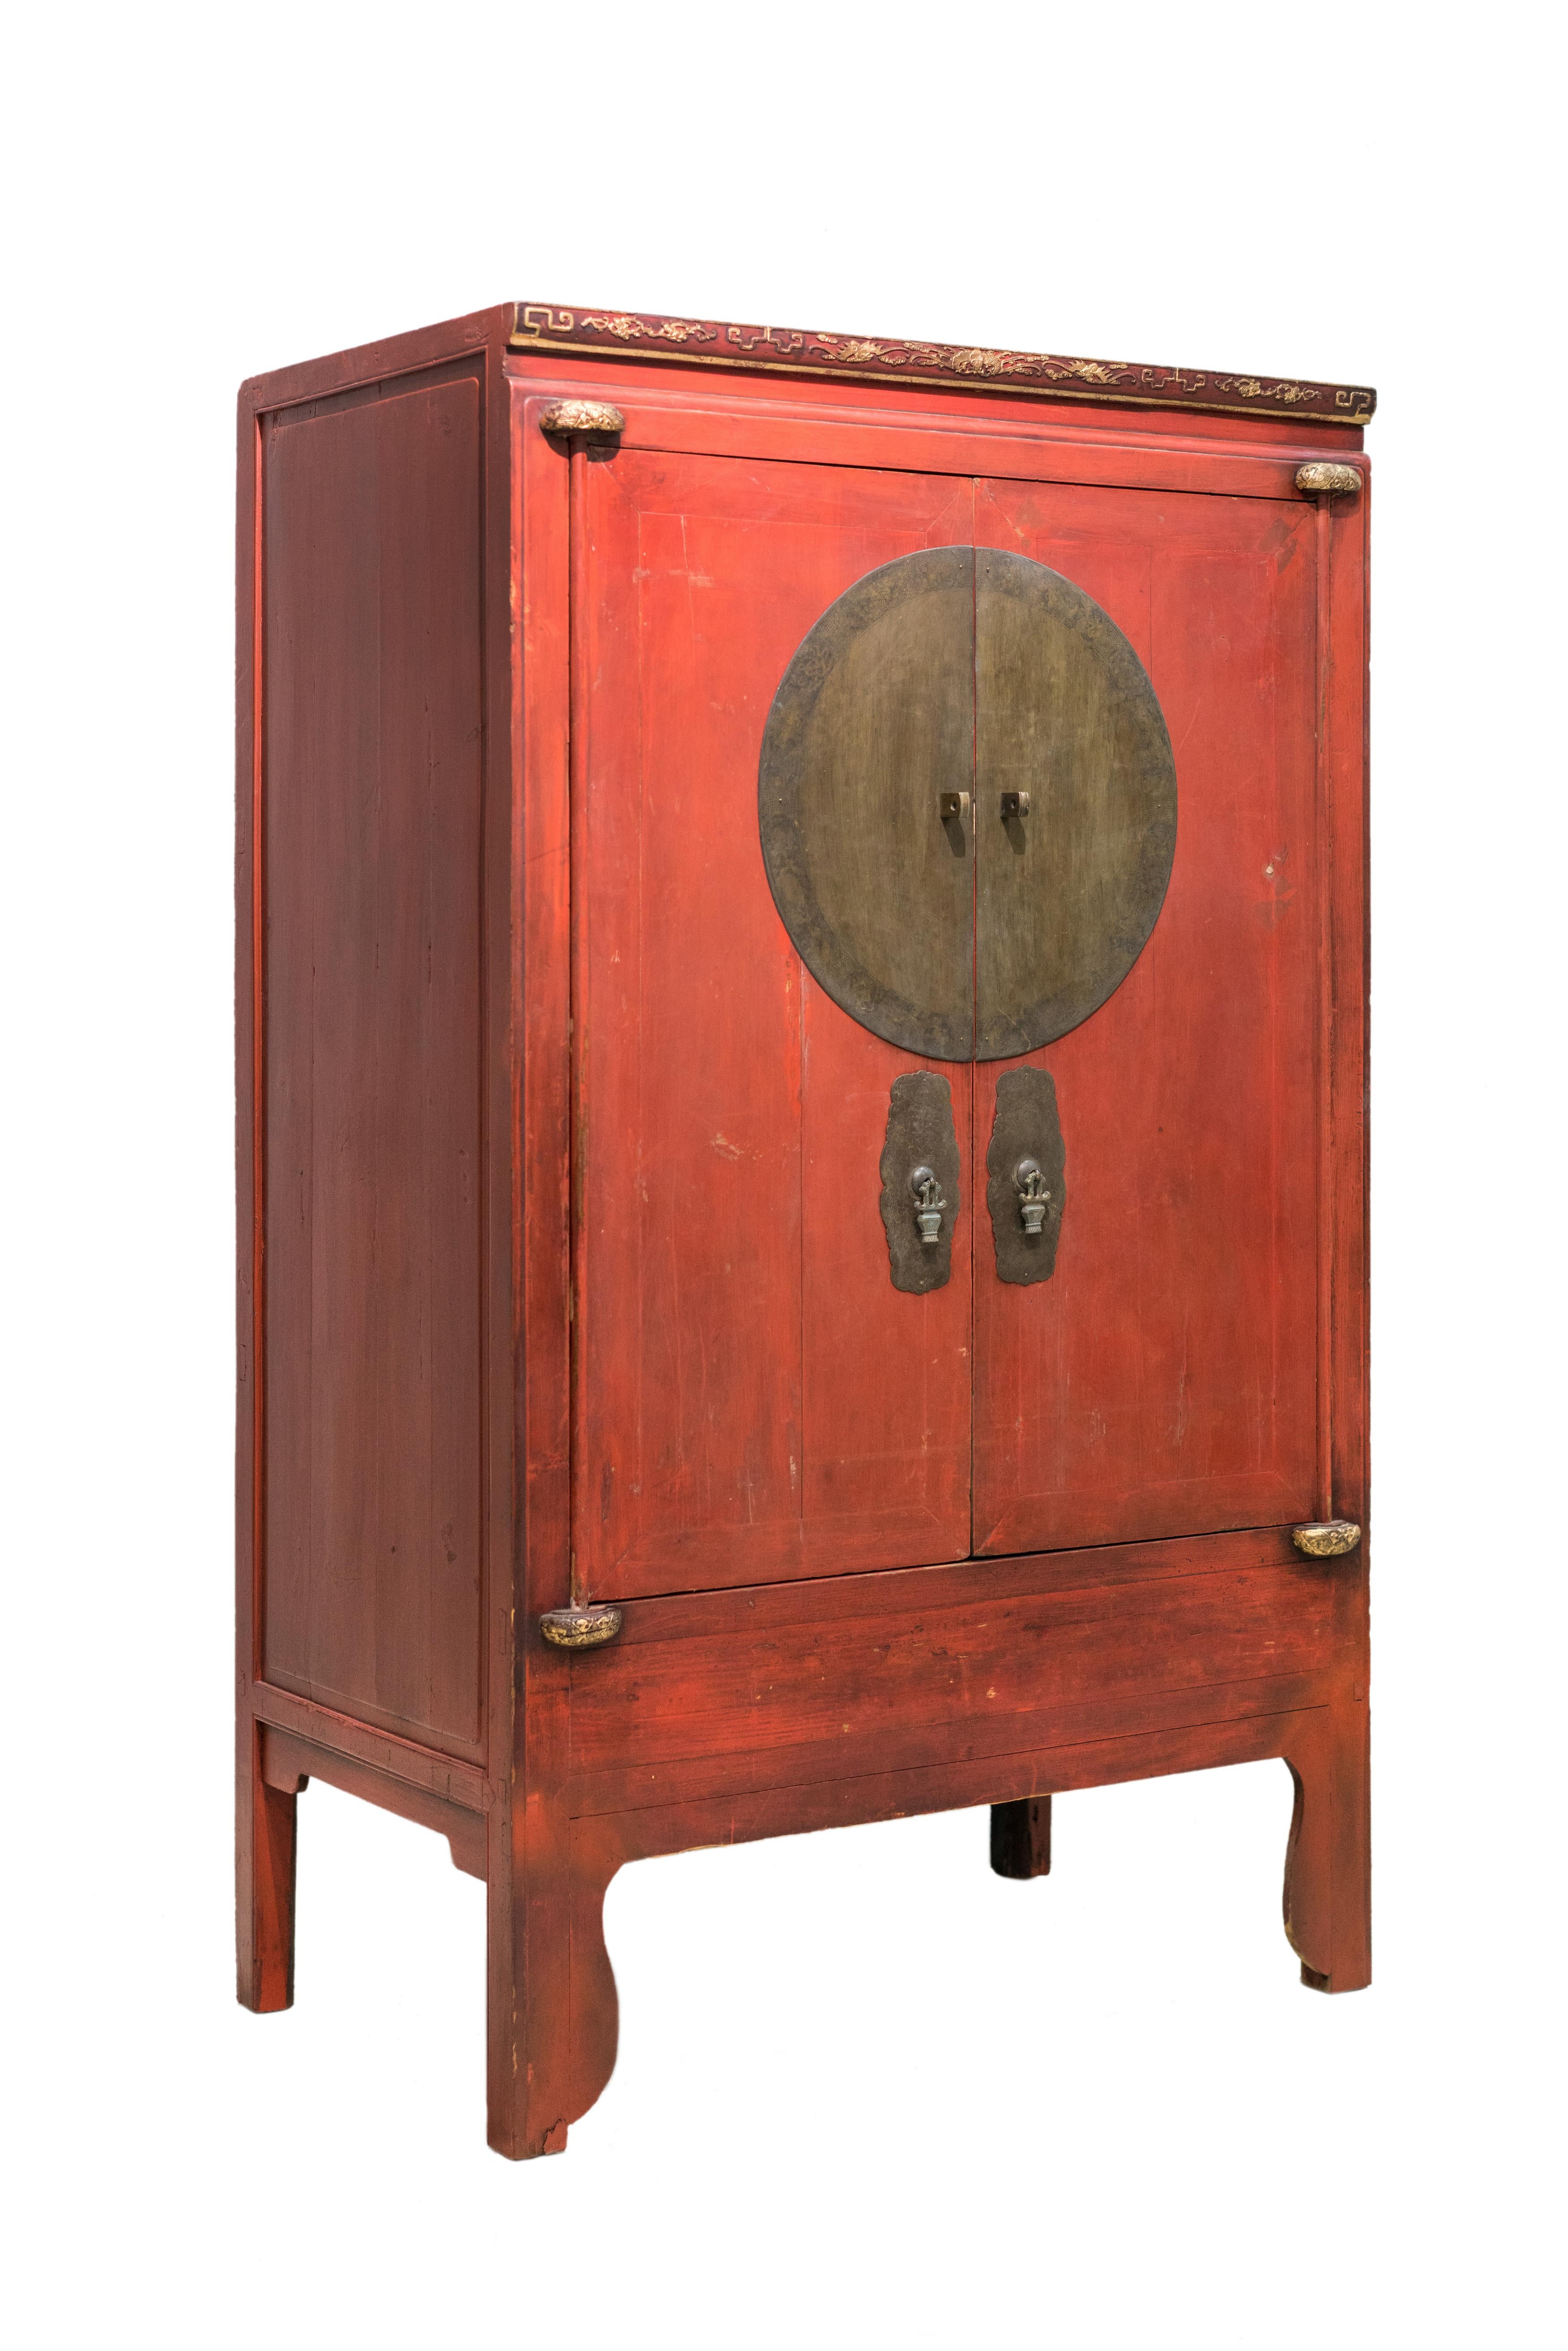 An antique red wedding cabinet from Zhejiang province. The carvings on the top front have designs of bats and clouds, symbolizing good fortune. The wooden knobs holding the hinges are intricately carved with a butterfly design. The round brass plate